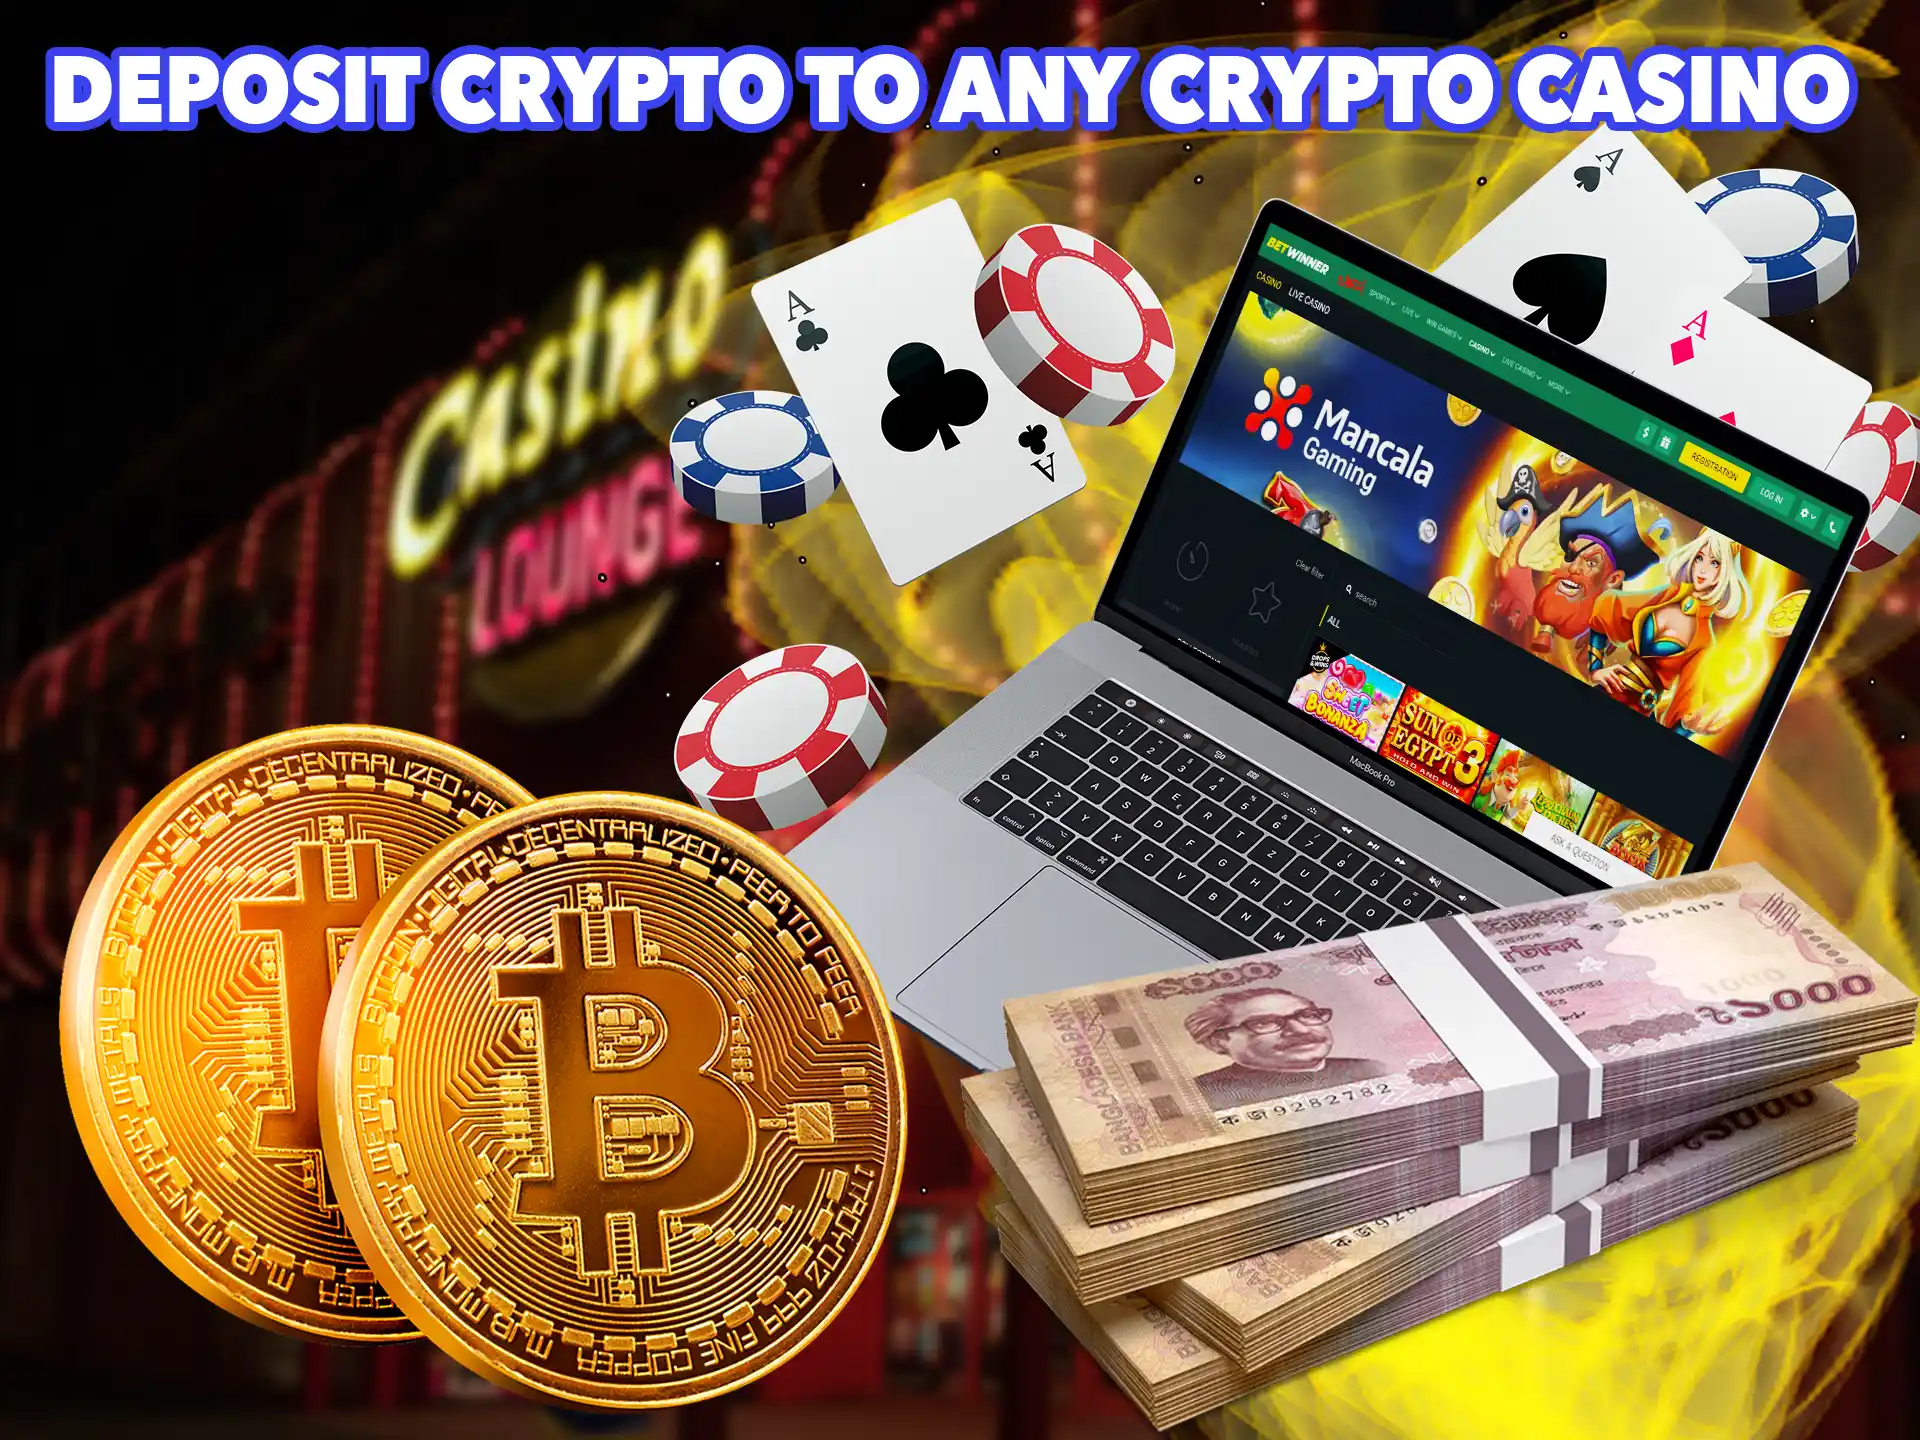 For convenience, choose the right casino from the bookmaker's list and go through the simple process of creating an account.